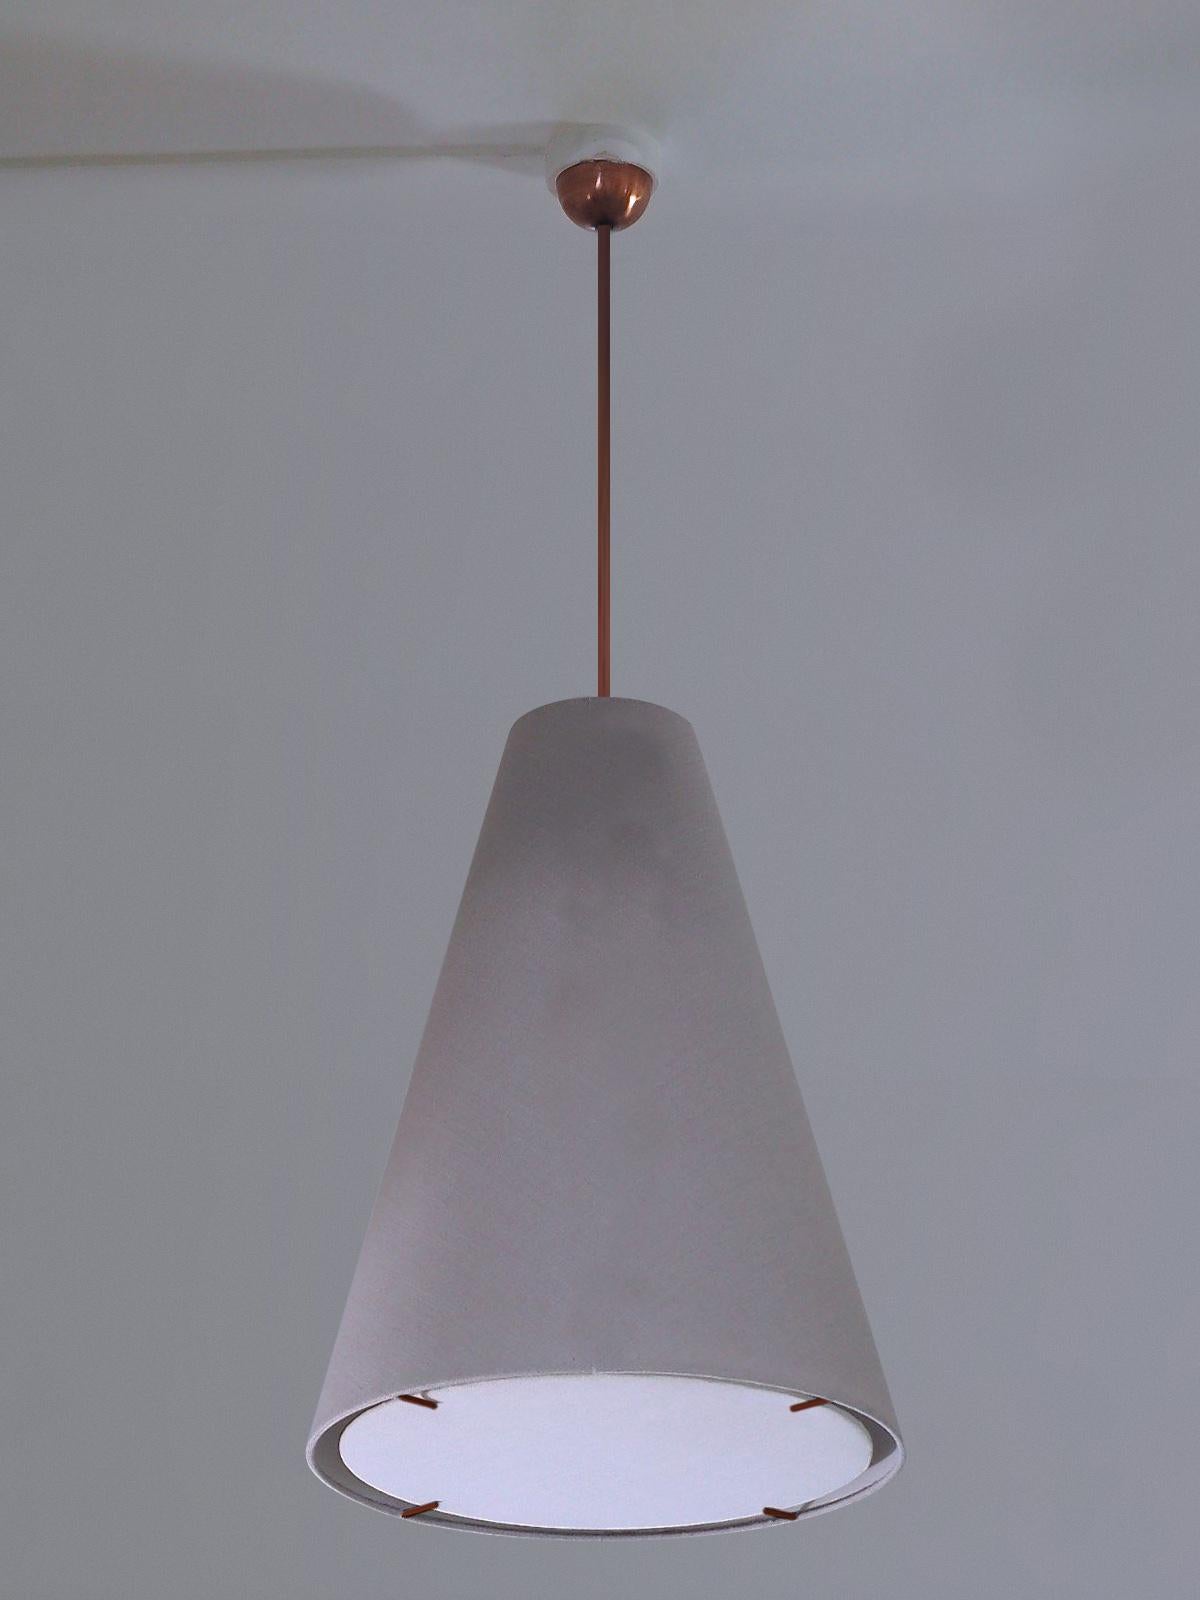 Witches Hat Pendant is a minimal uncluttered, selectively detailed, timeless, conical pendant that works equally well flush mounted or suspended. These hand made Wende Reid Studio lights include custom patinated solid brass stems and ceiling